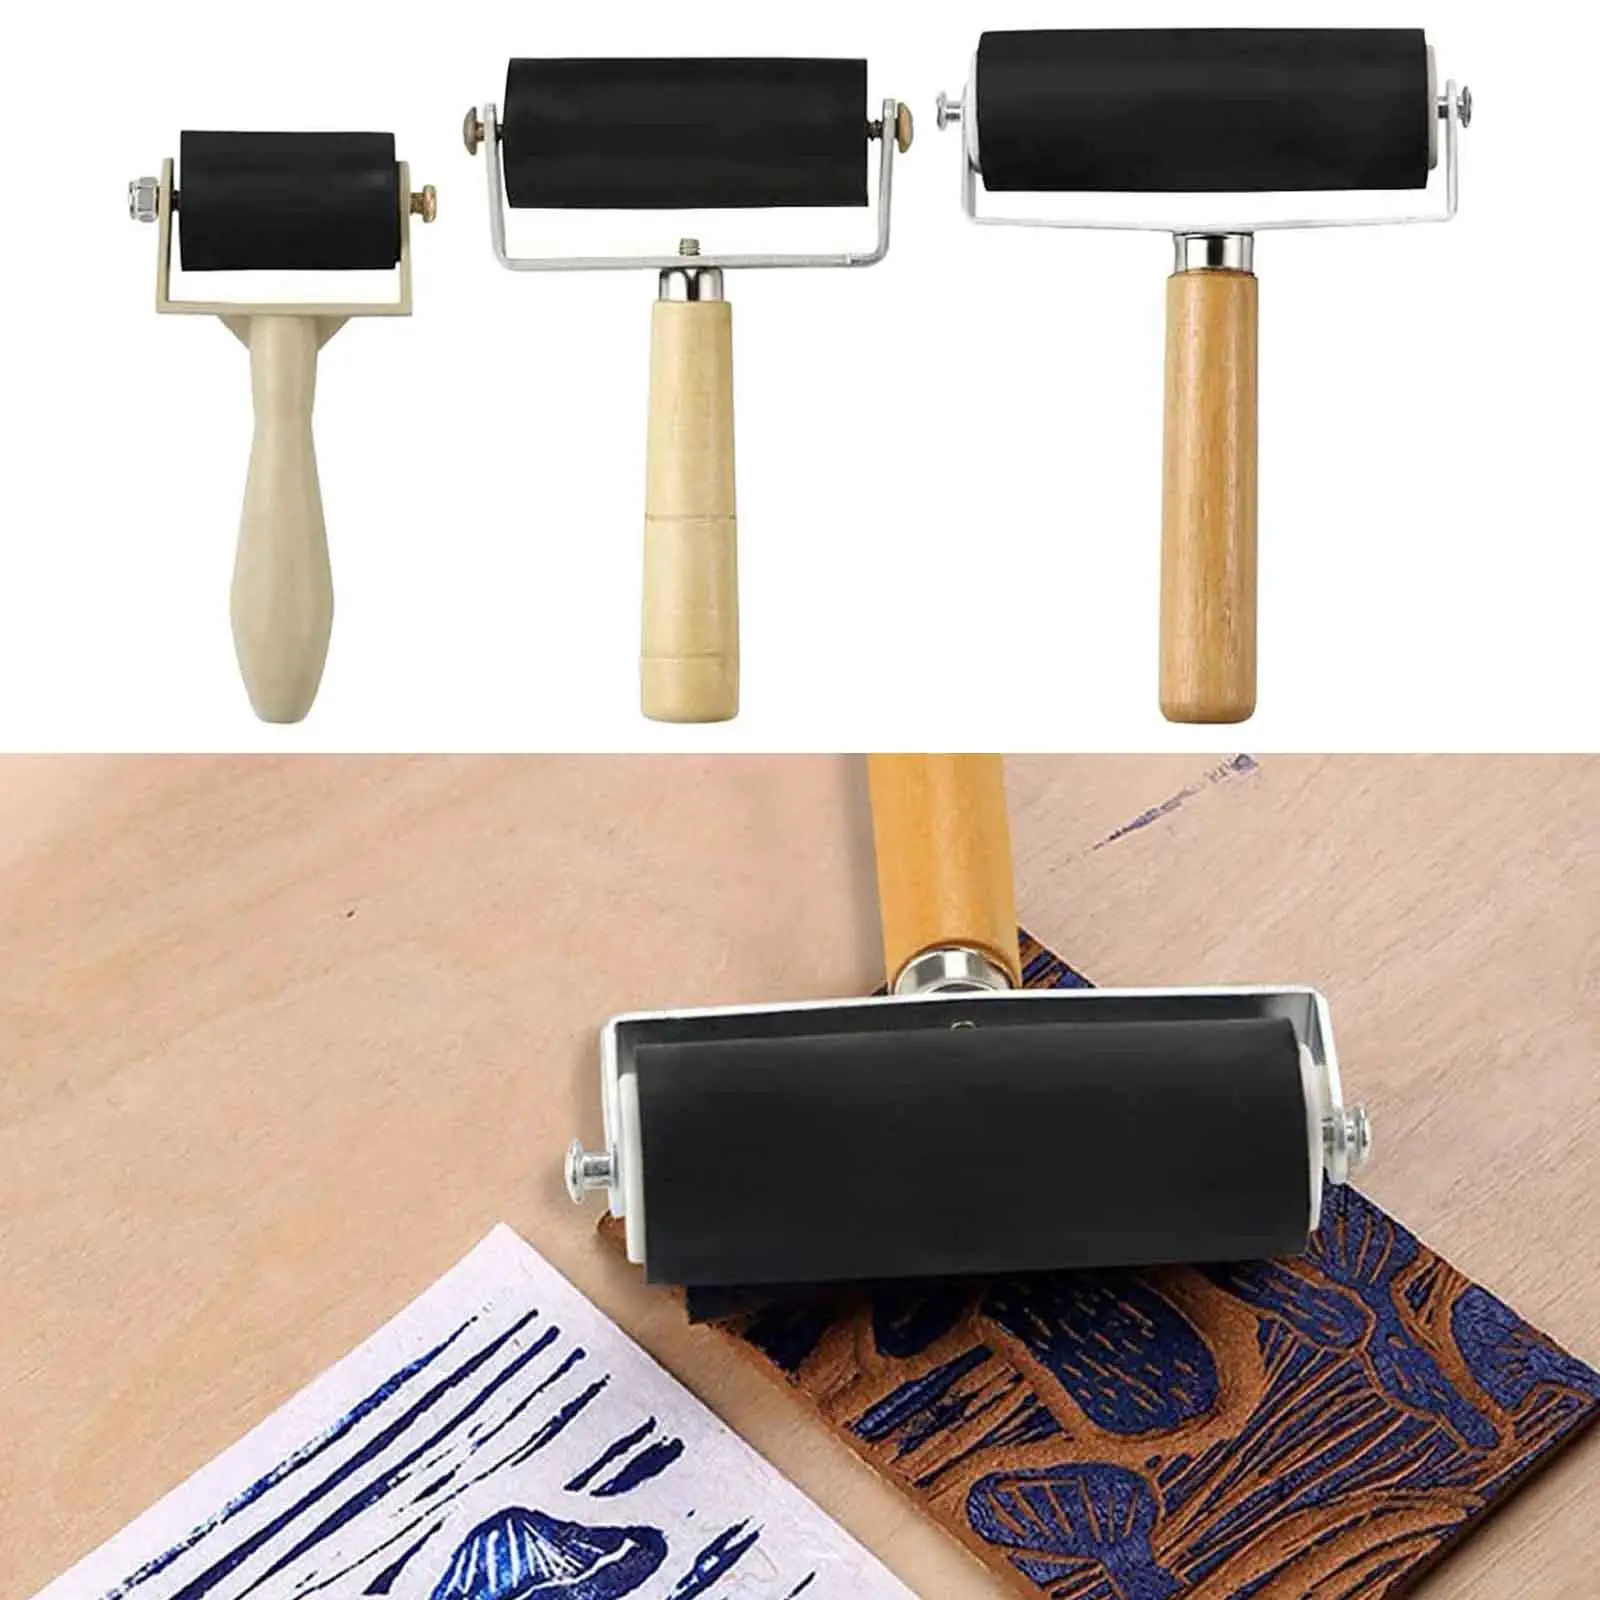 3x Rubber Brayer Roller Arts Crafts Applicator for Carved Surfaces Printing